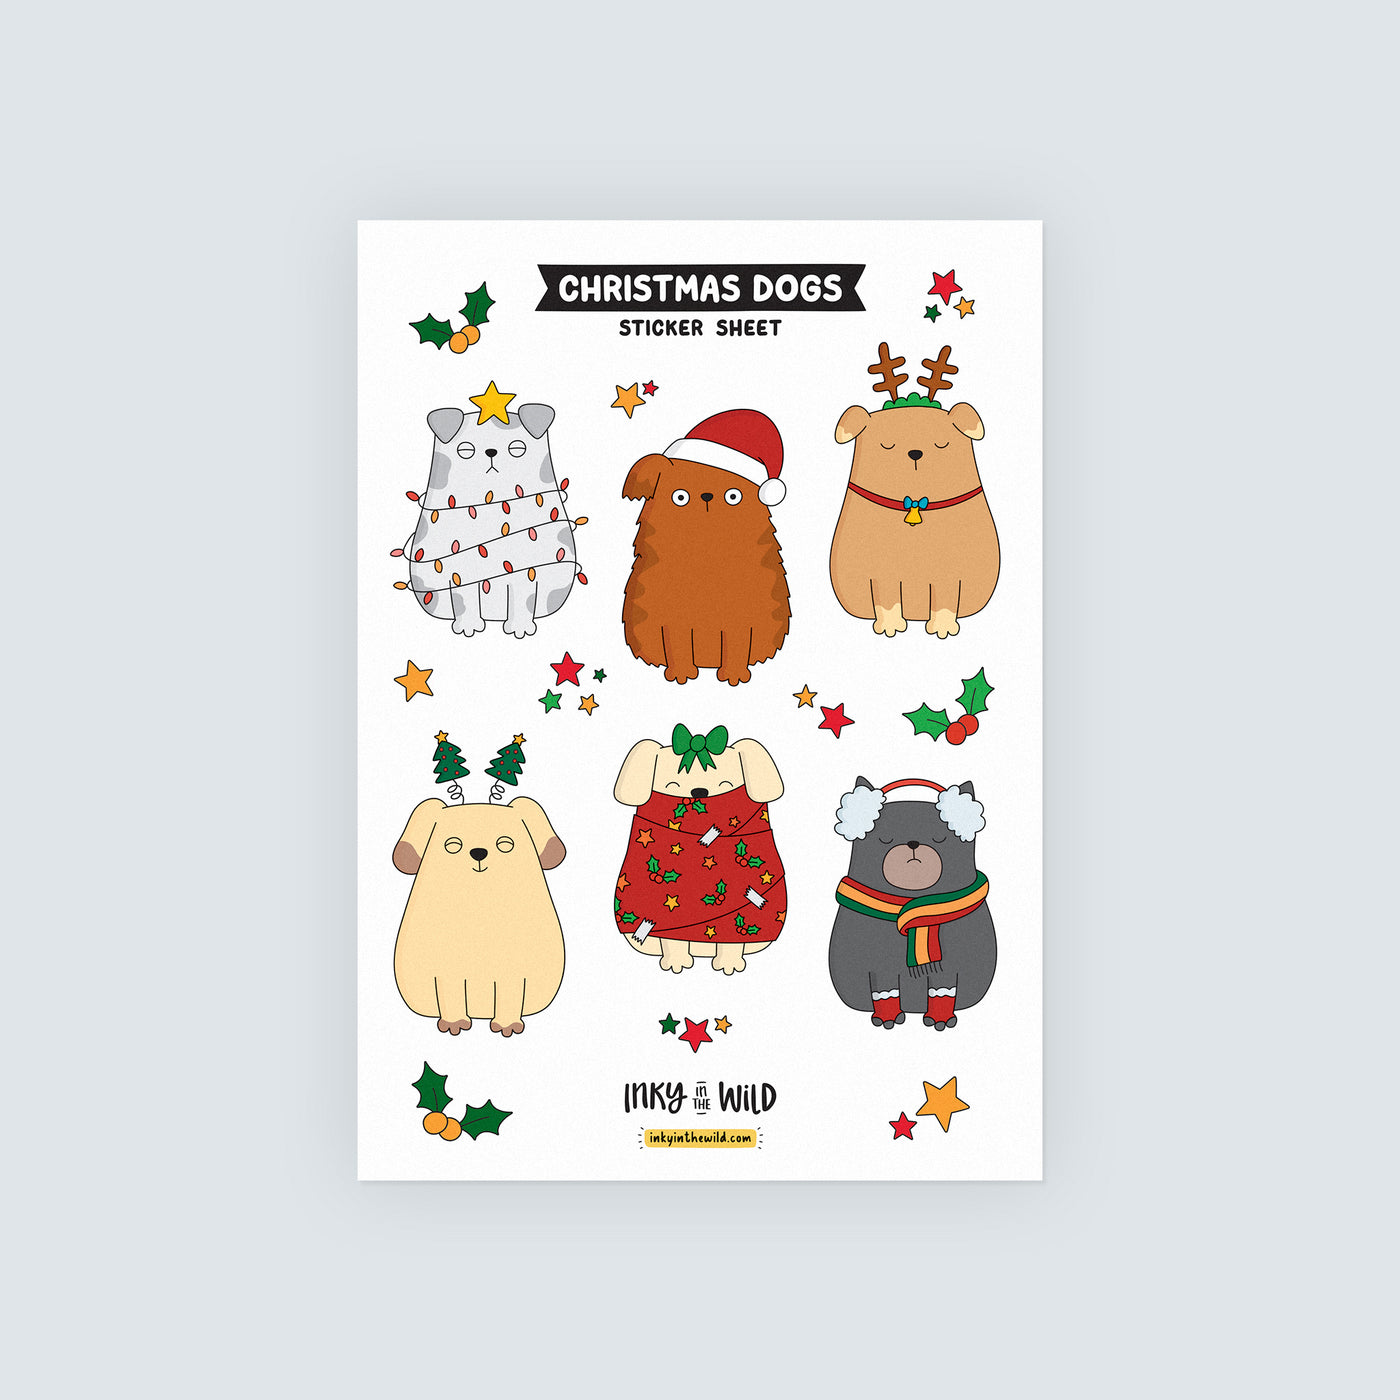 Dogs at Christmas Sticker Sheet (A5)